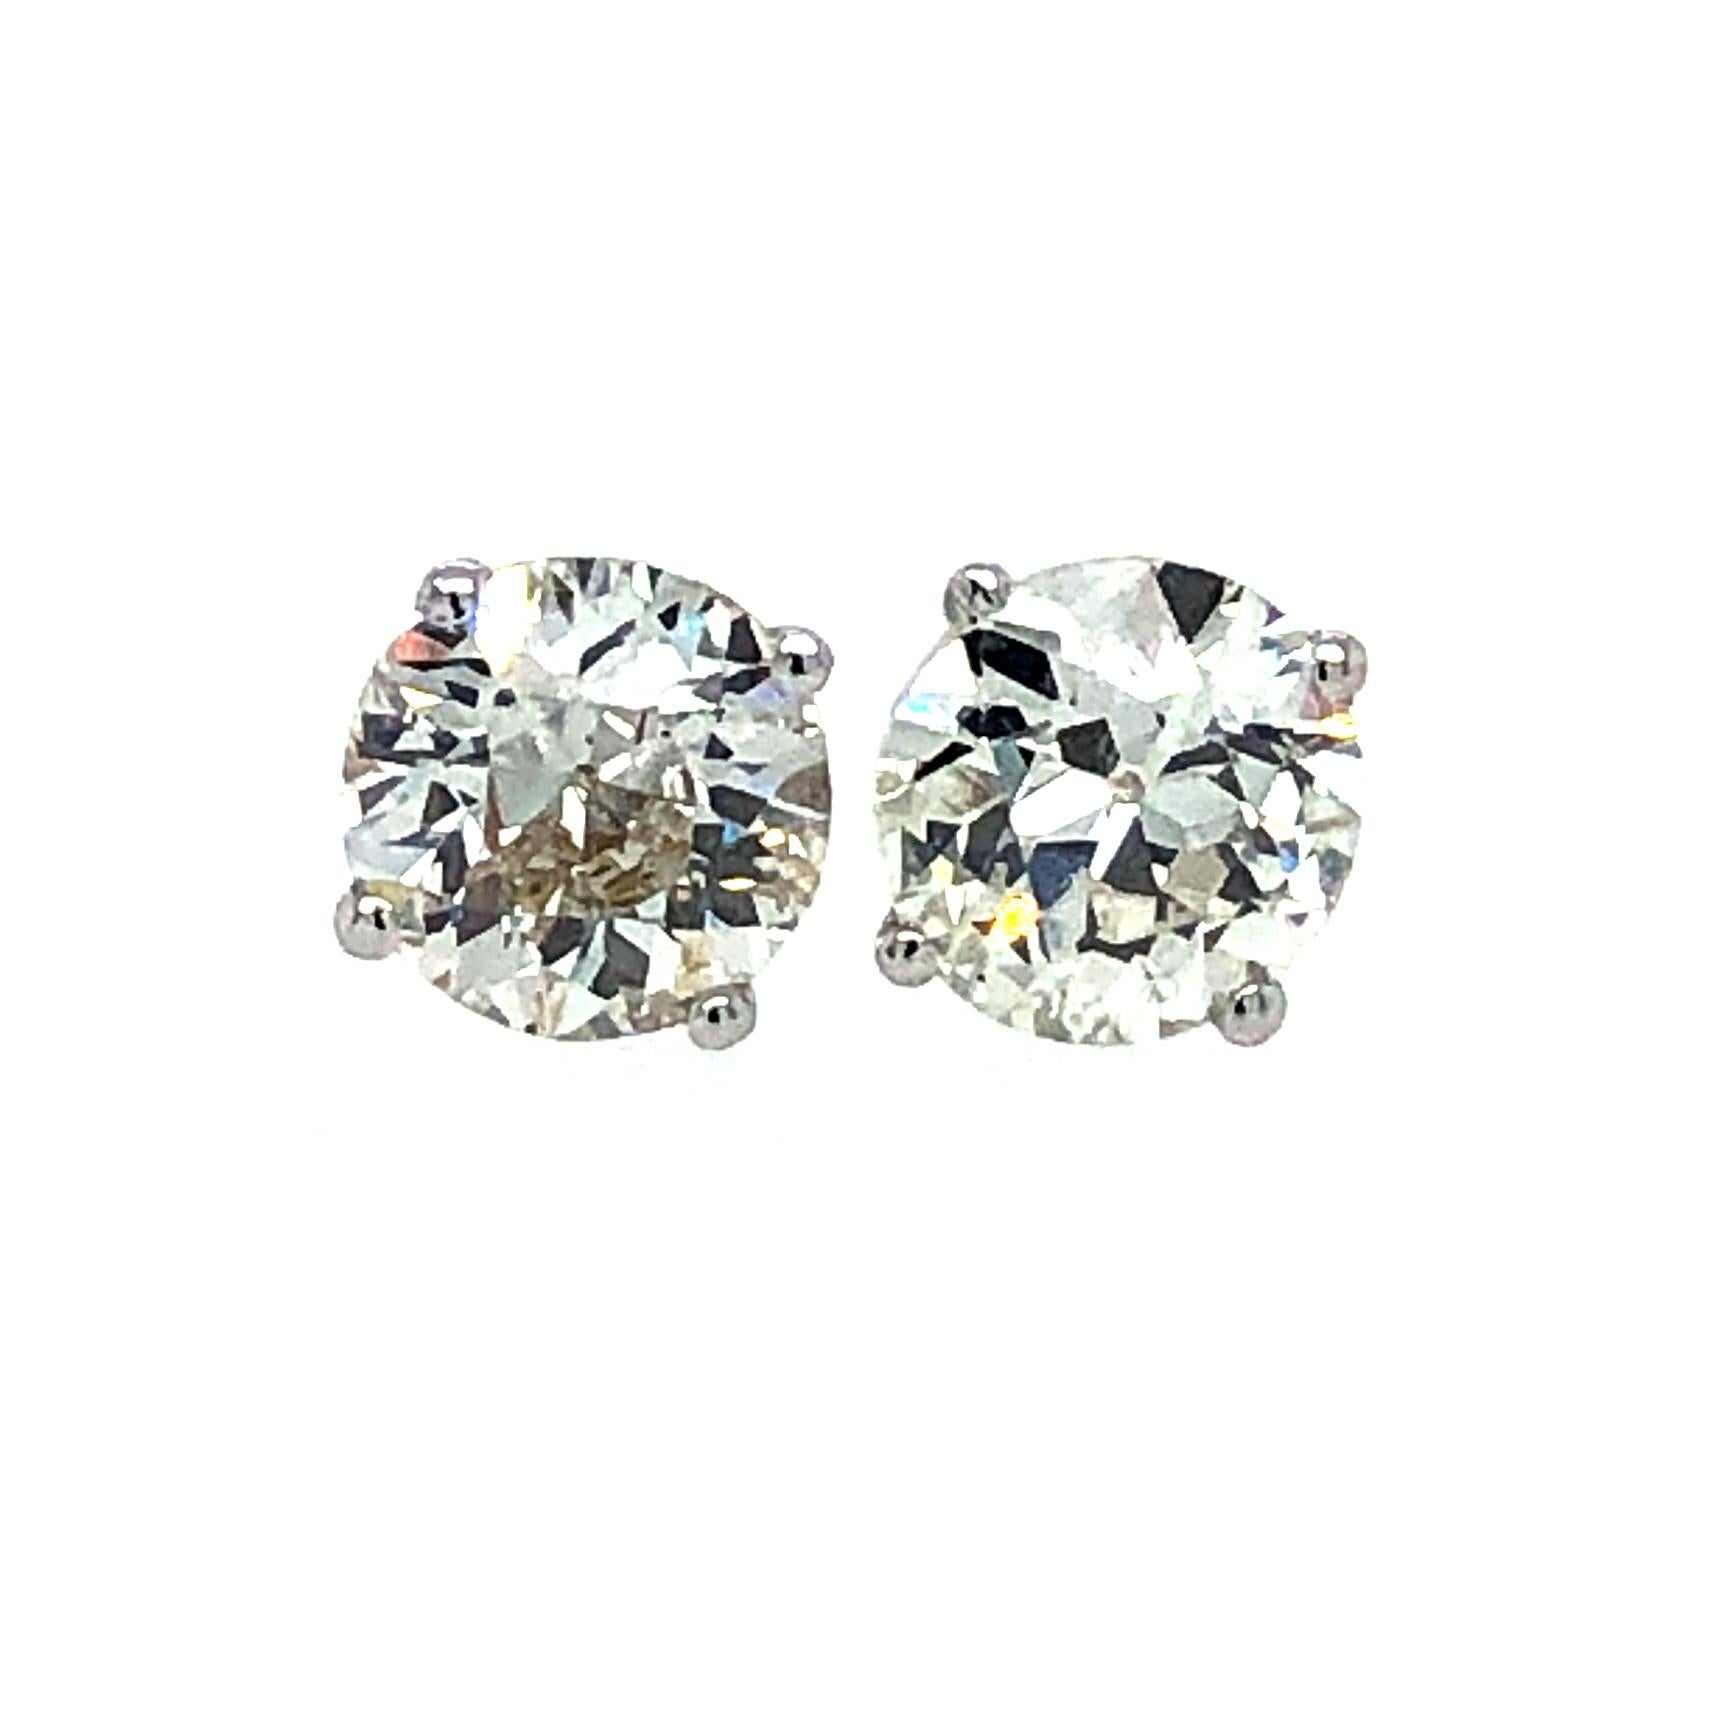 Offered here is a perfectly matched old European cut diamonds set in three ( 3 ) prong platinum martini settings. The diamonds are I-J color Vs2 to fine Si1 clarity with a total weight of about 1.89 carats. The studs are marked PT950 on the large